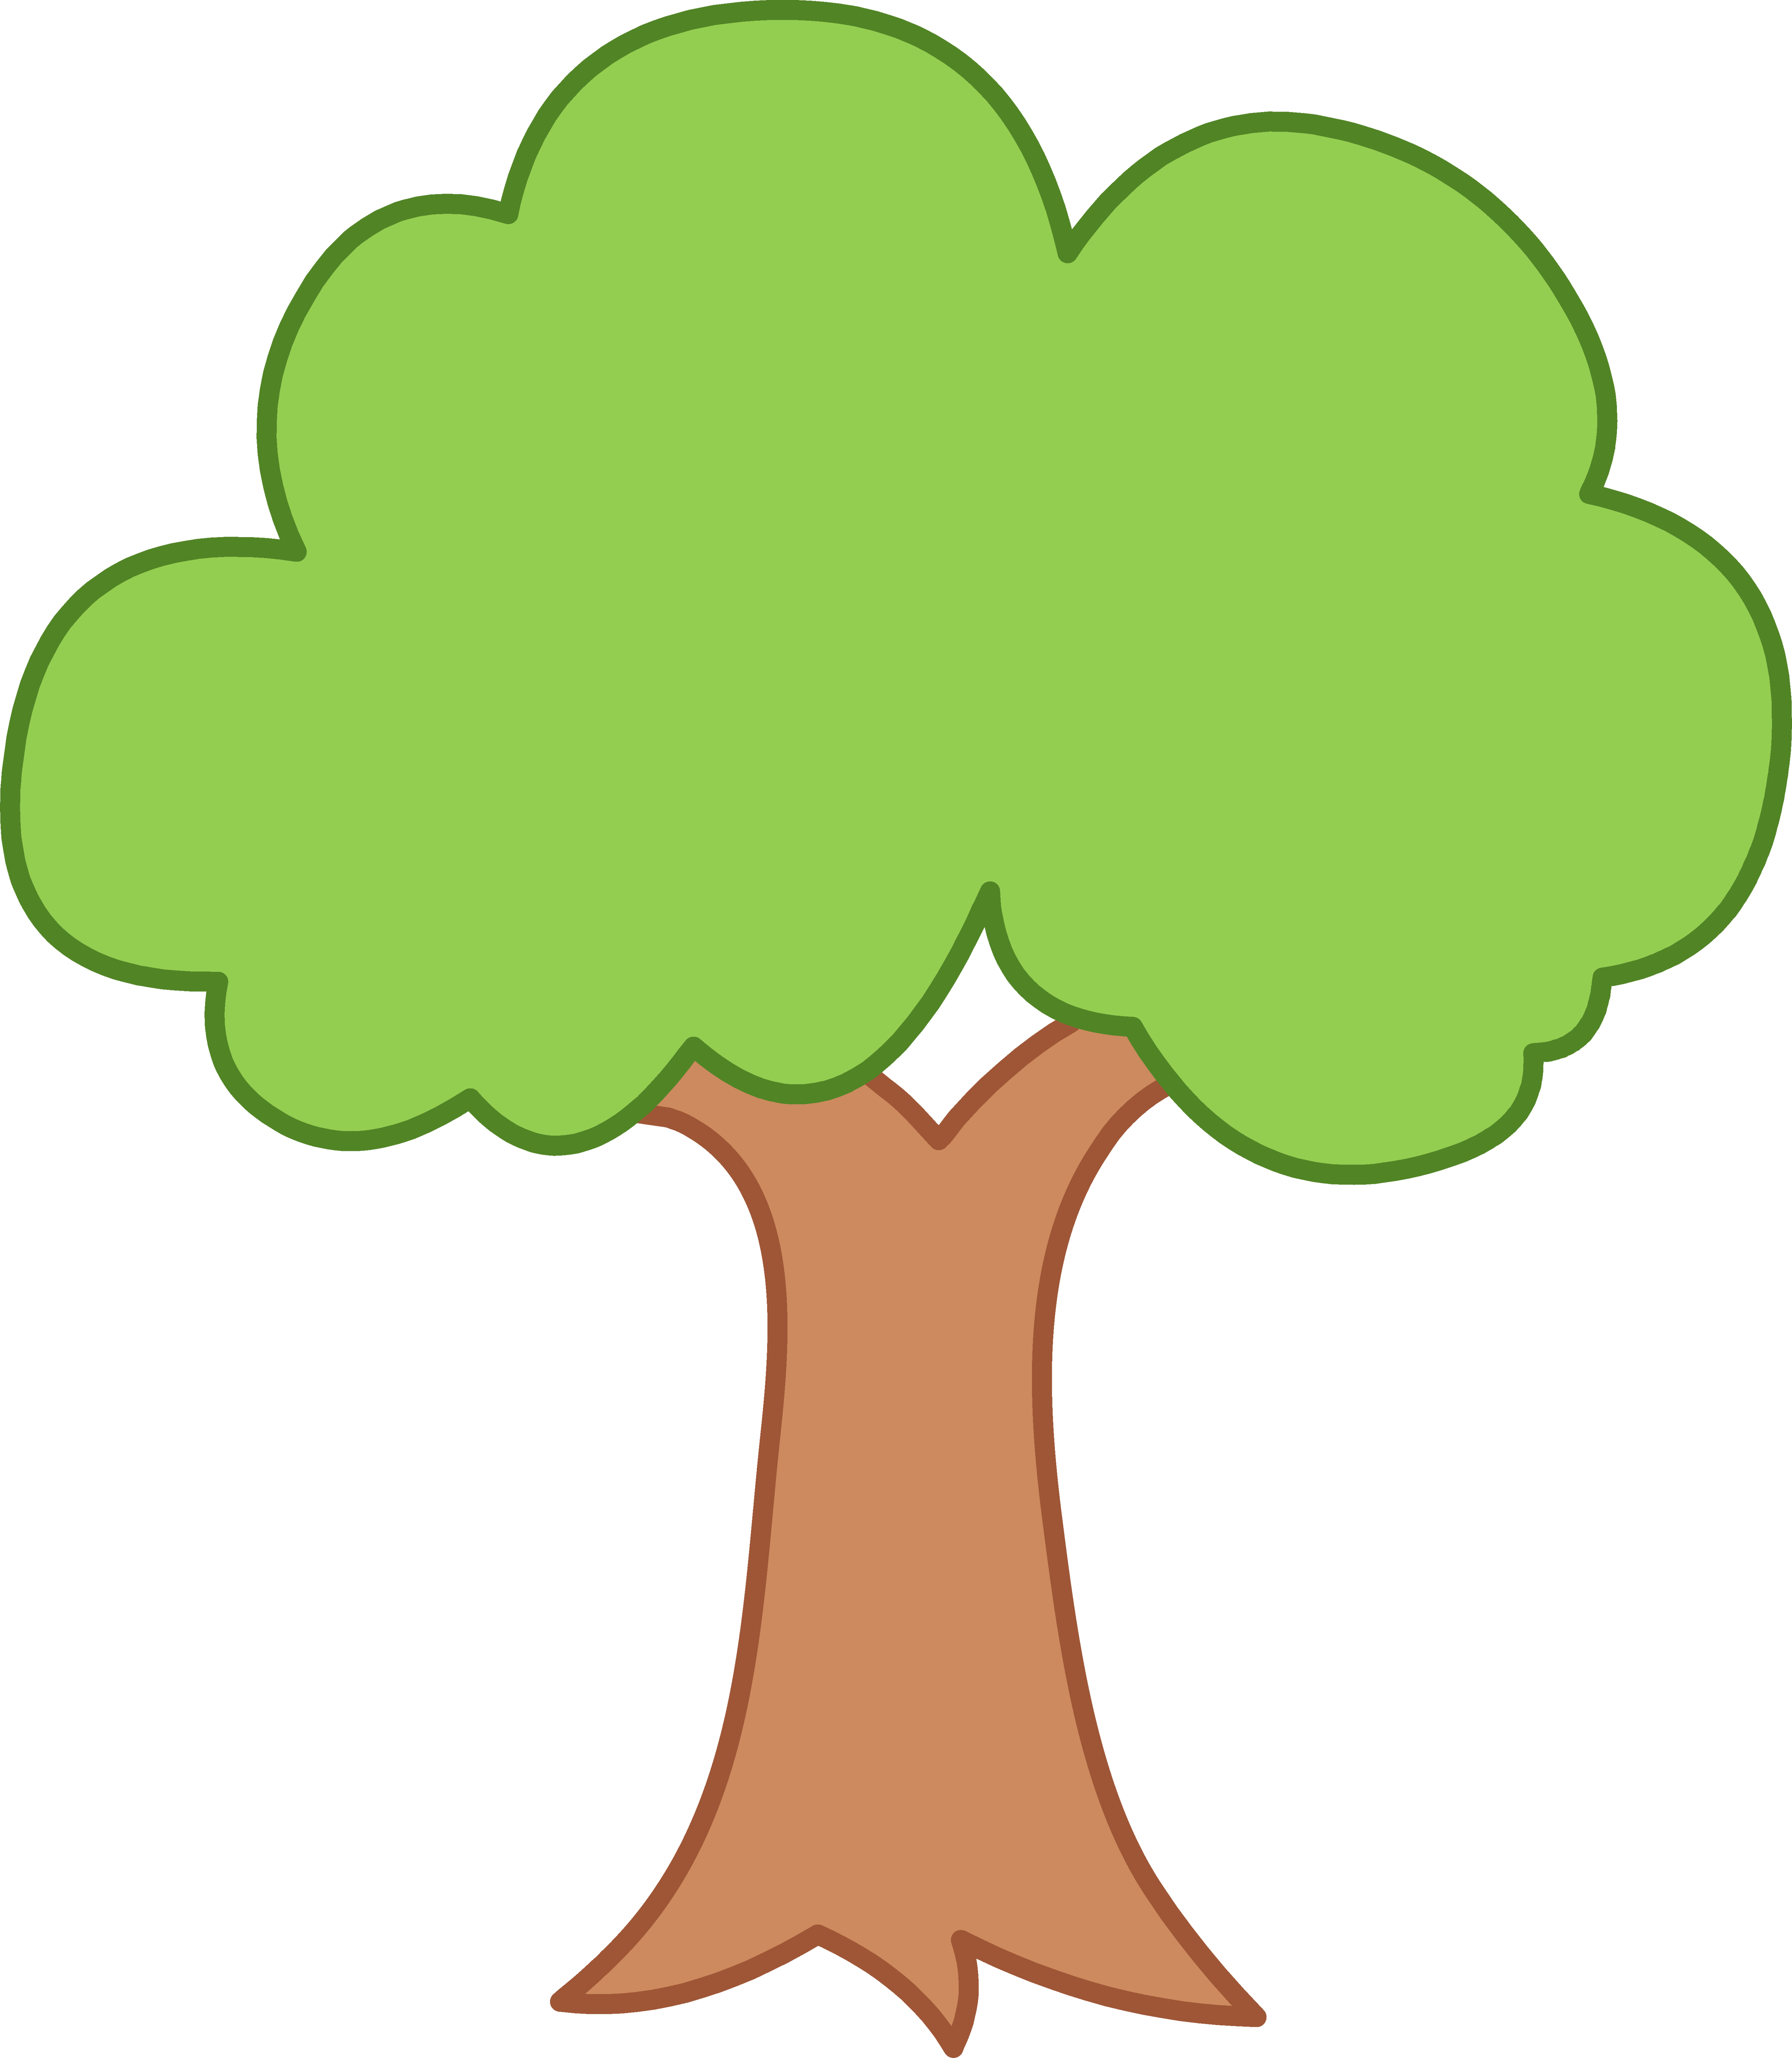 Tree Cartoon Hd Clipart Free to use Clip Art Resource | Pictureicon -  ClipArt Best - ClipArt Best